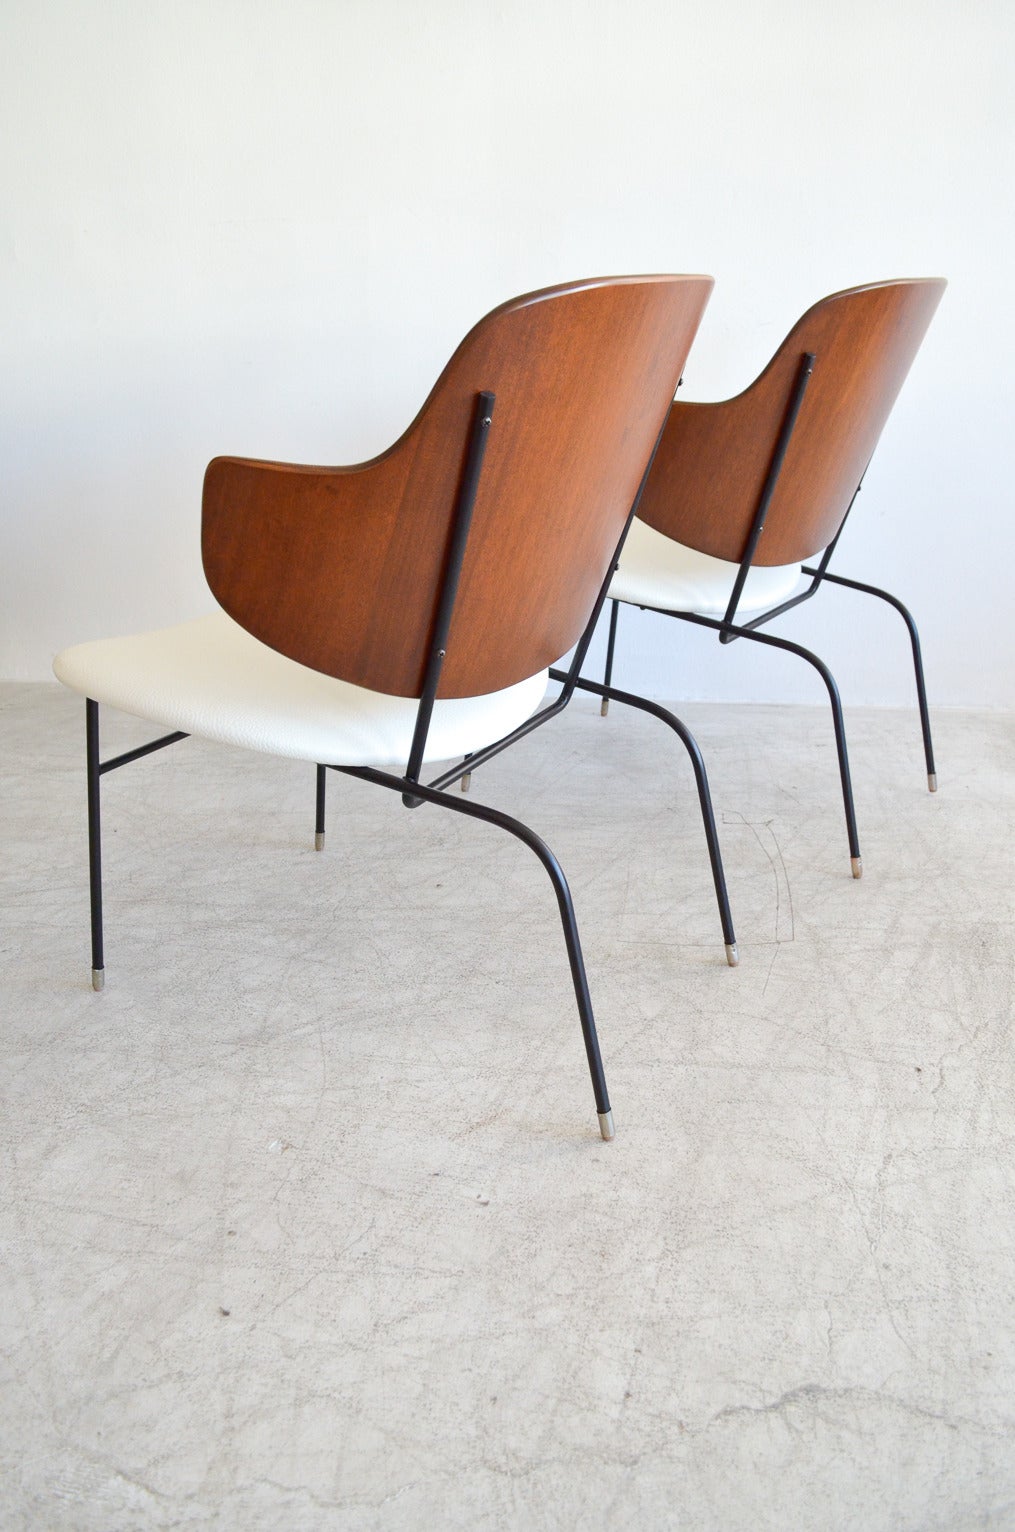 Highly desirable PAIR of Kofod-Larsen penguin lounge chairs, signed and restored to showroom condition. Bentwood back made in Denmark.

These are the lower and wider version of the dining chairs, more desirable and harder to find. Professionally